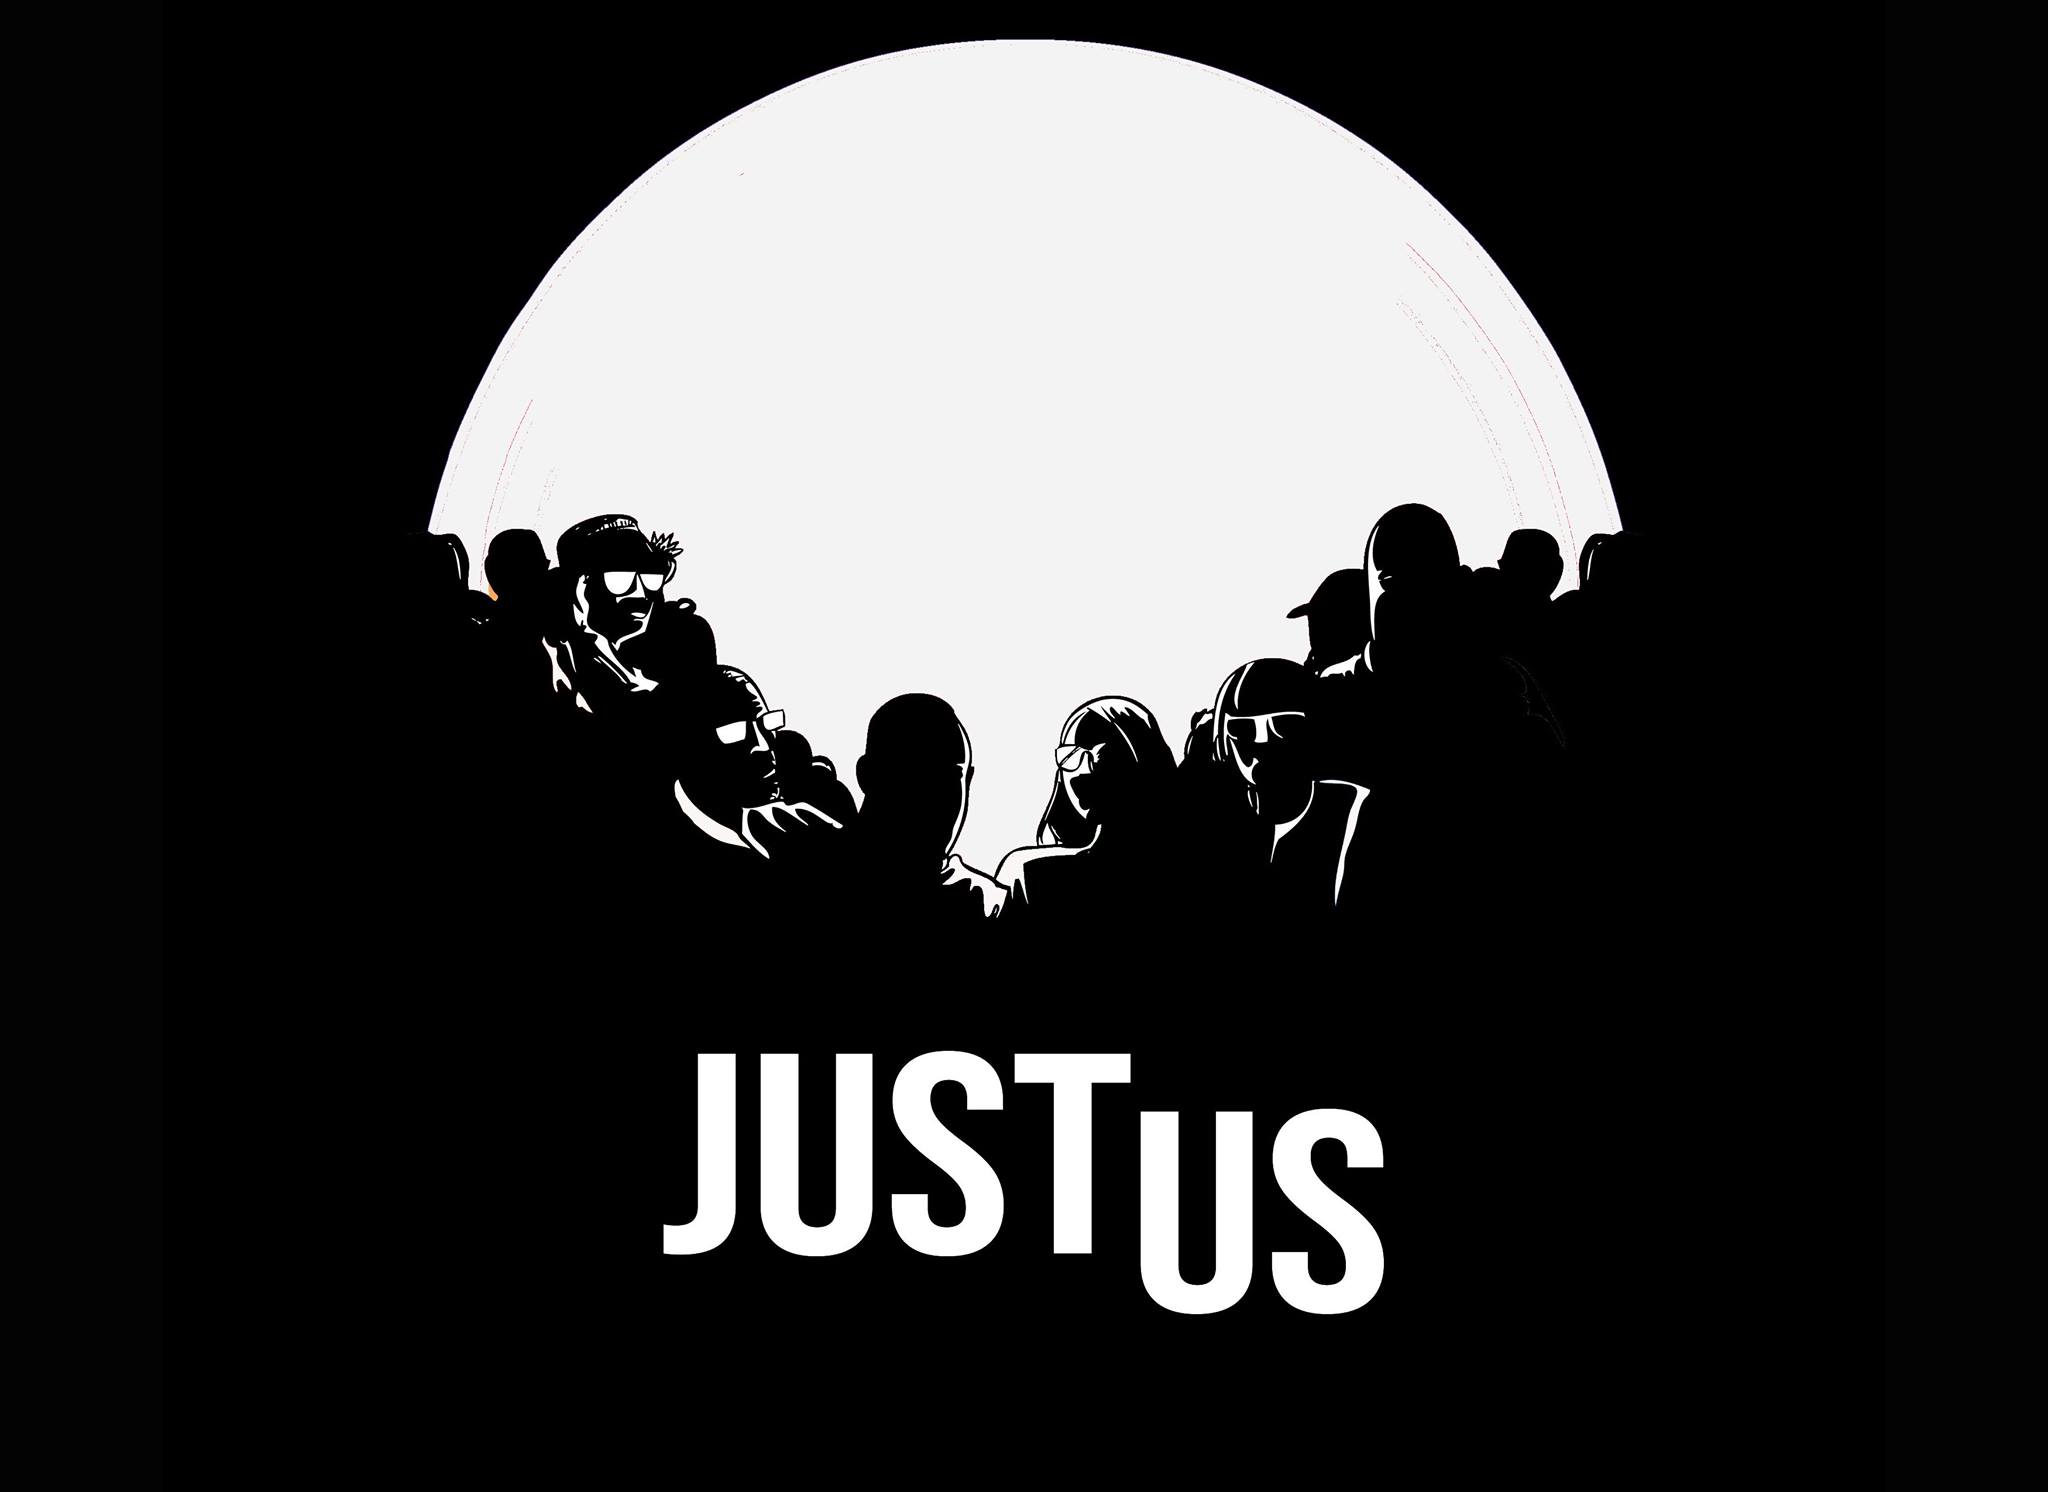 JustUs film poster, illustrated sillhouettes of people in front of a circle